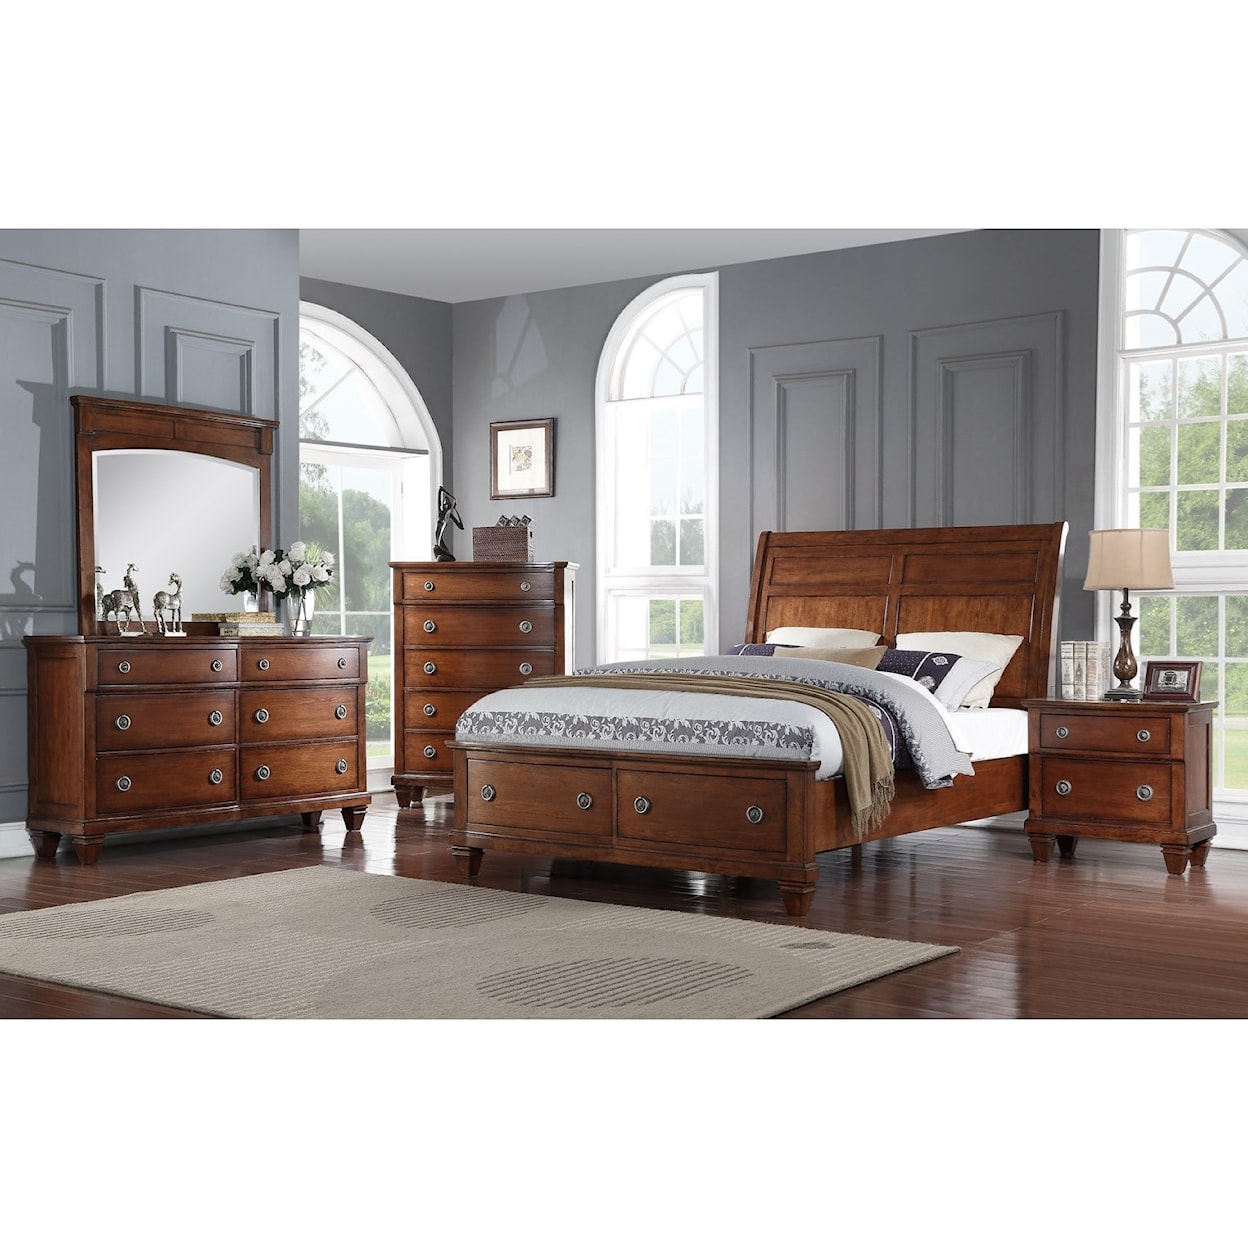 Avalon Furniture B068 Queen Bedroom Group